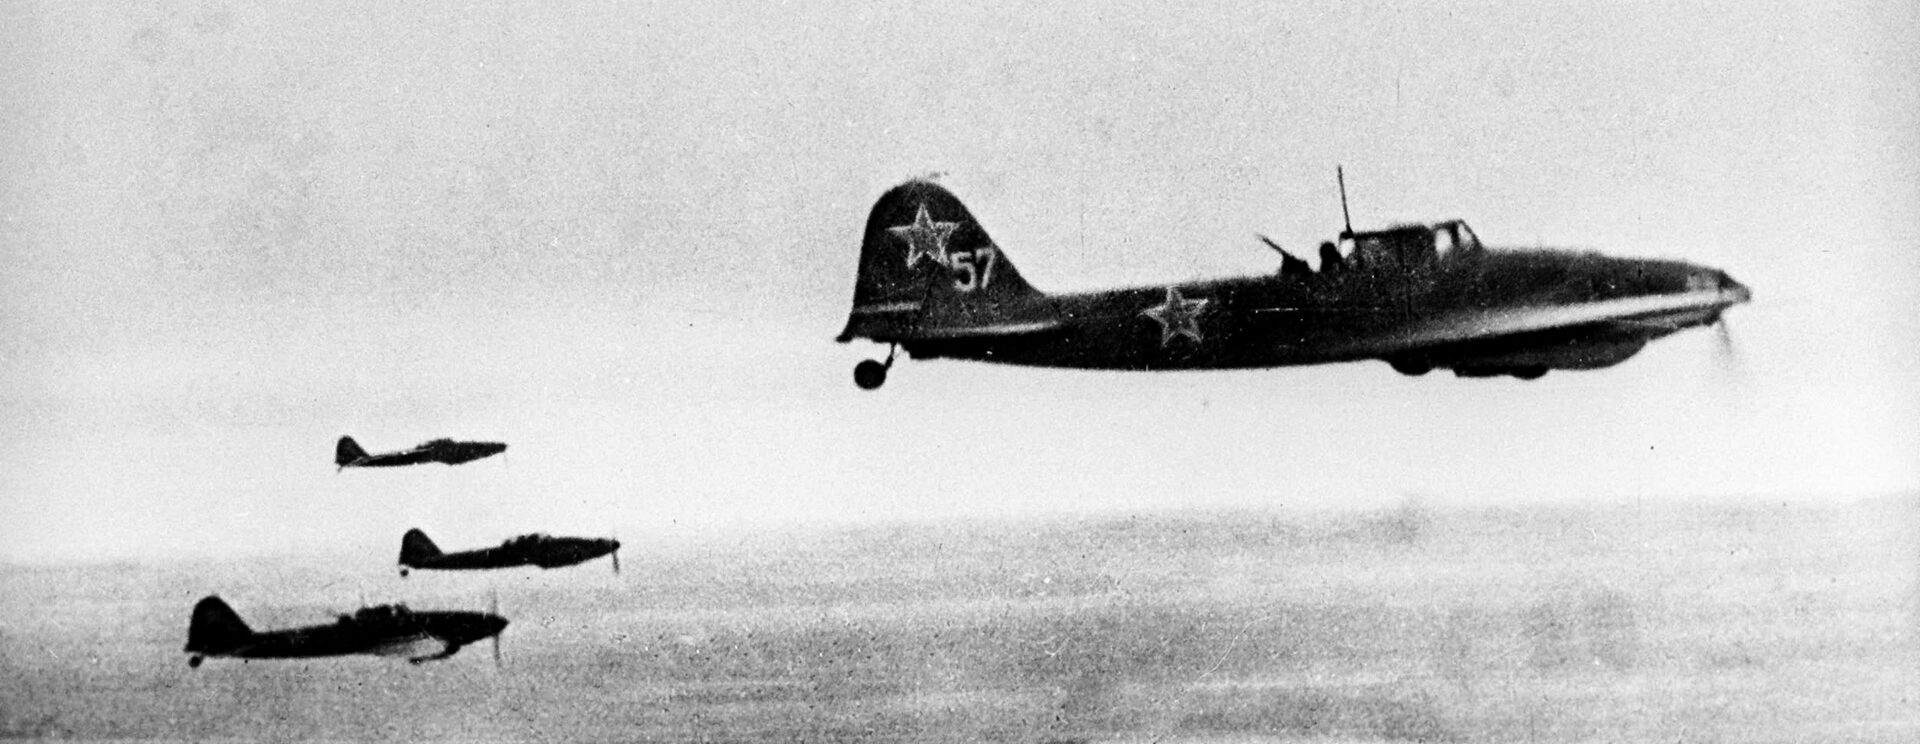 Red Air Force Ilyushin IL-2 fighters fly uncontested over Königsberg, April 1945. Such planes strafed columns of refugees and attacked defenseless ships packed with evacuees.	